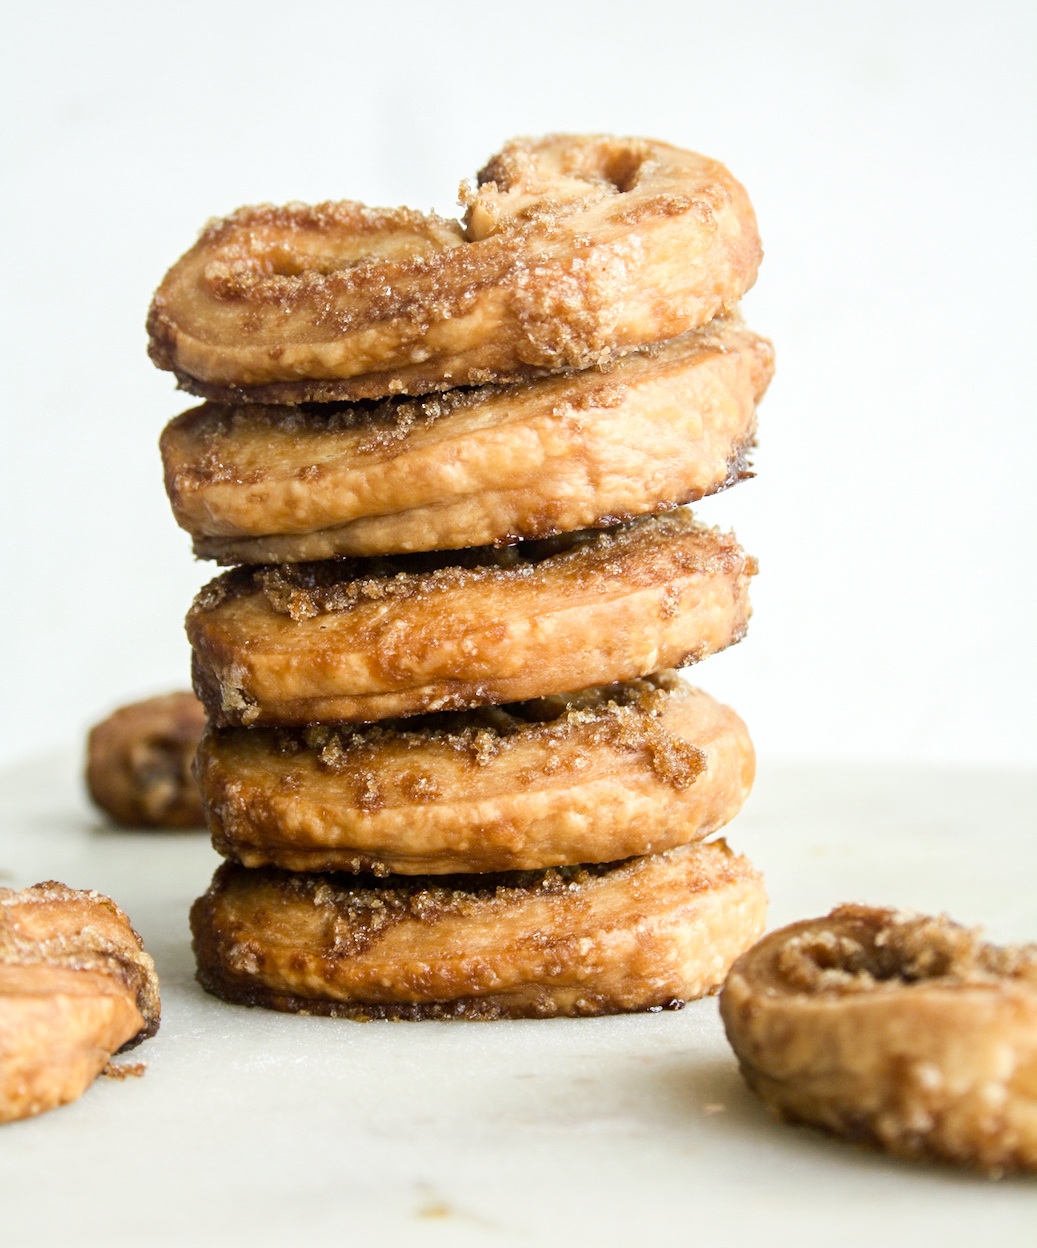 Crunchy, flaky cookies made with homemade puff pastry, layered with brown sugar